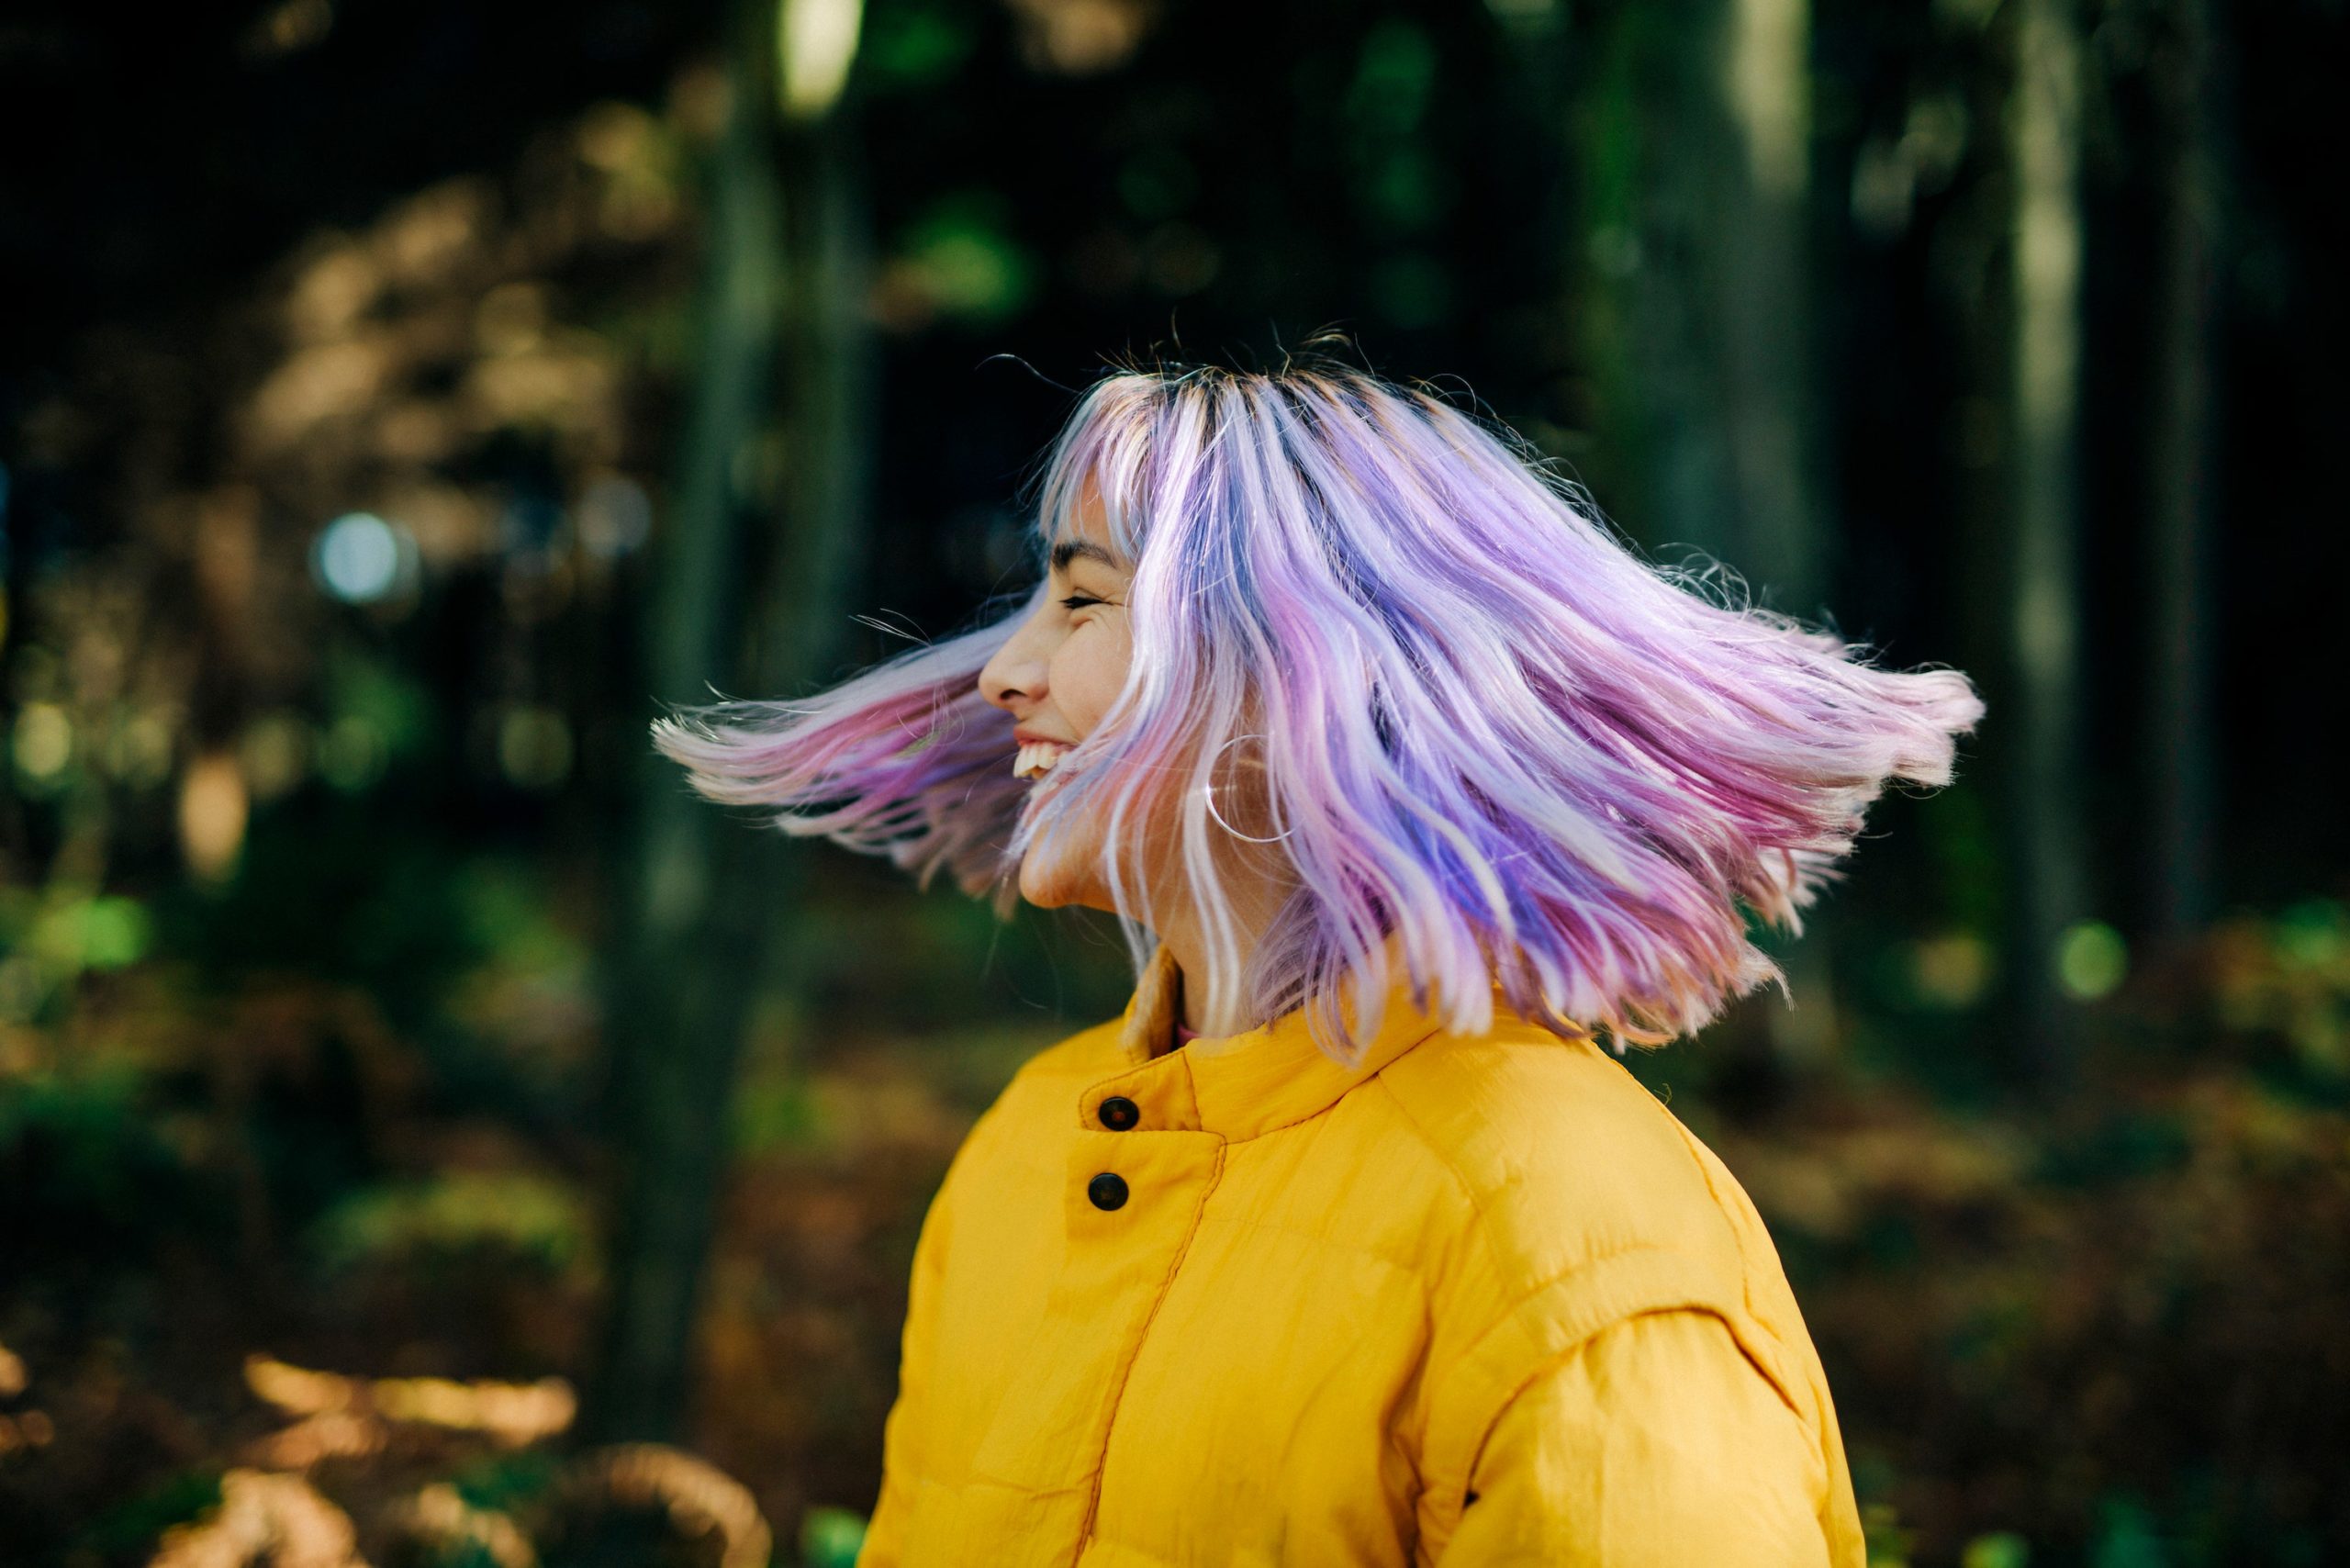 The Pandemic Has Determined Fall 2020’s Hair Color Trends